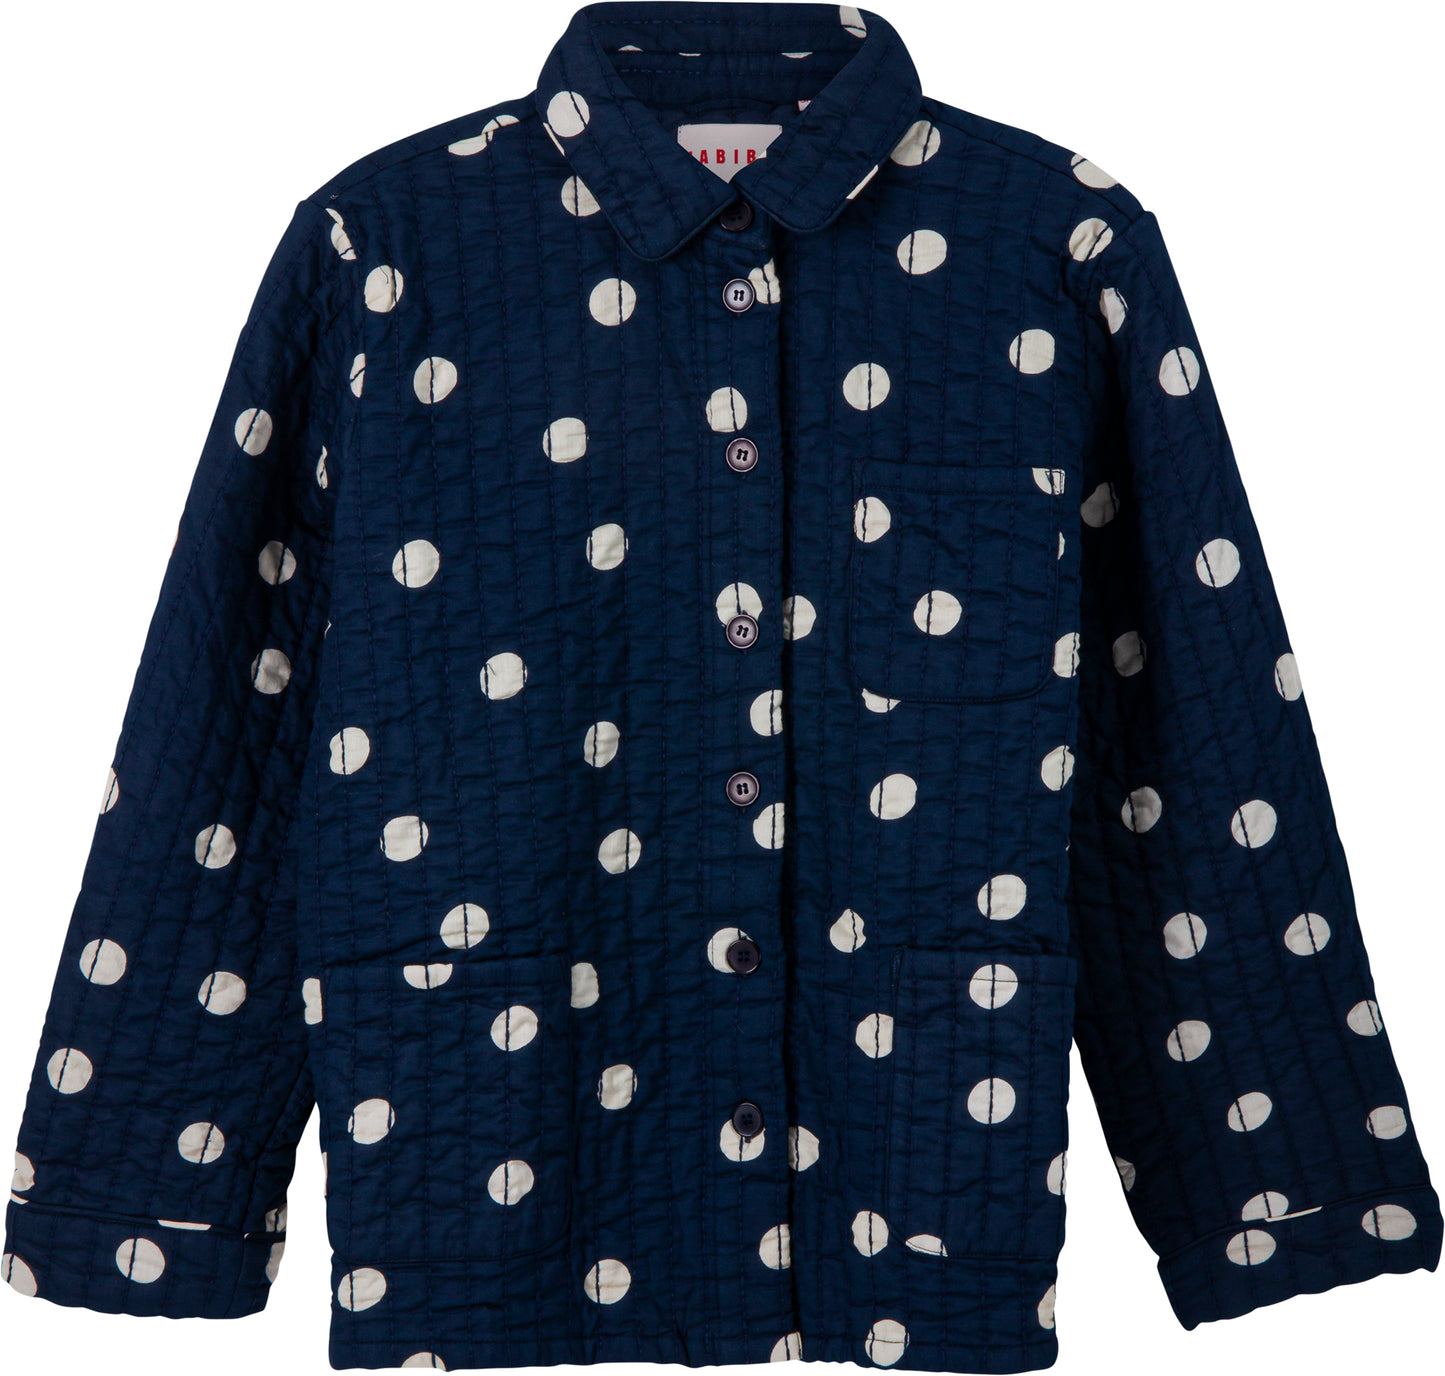 MILLA QUILTED JACKET - Navy